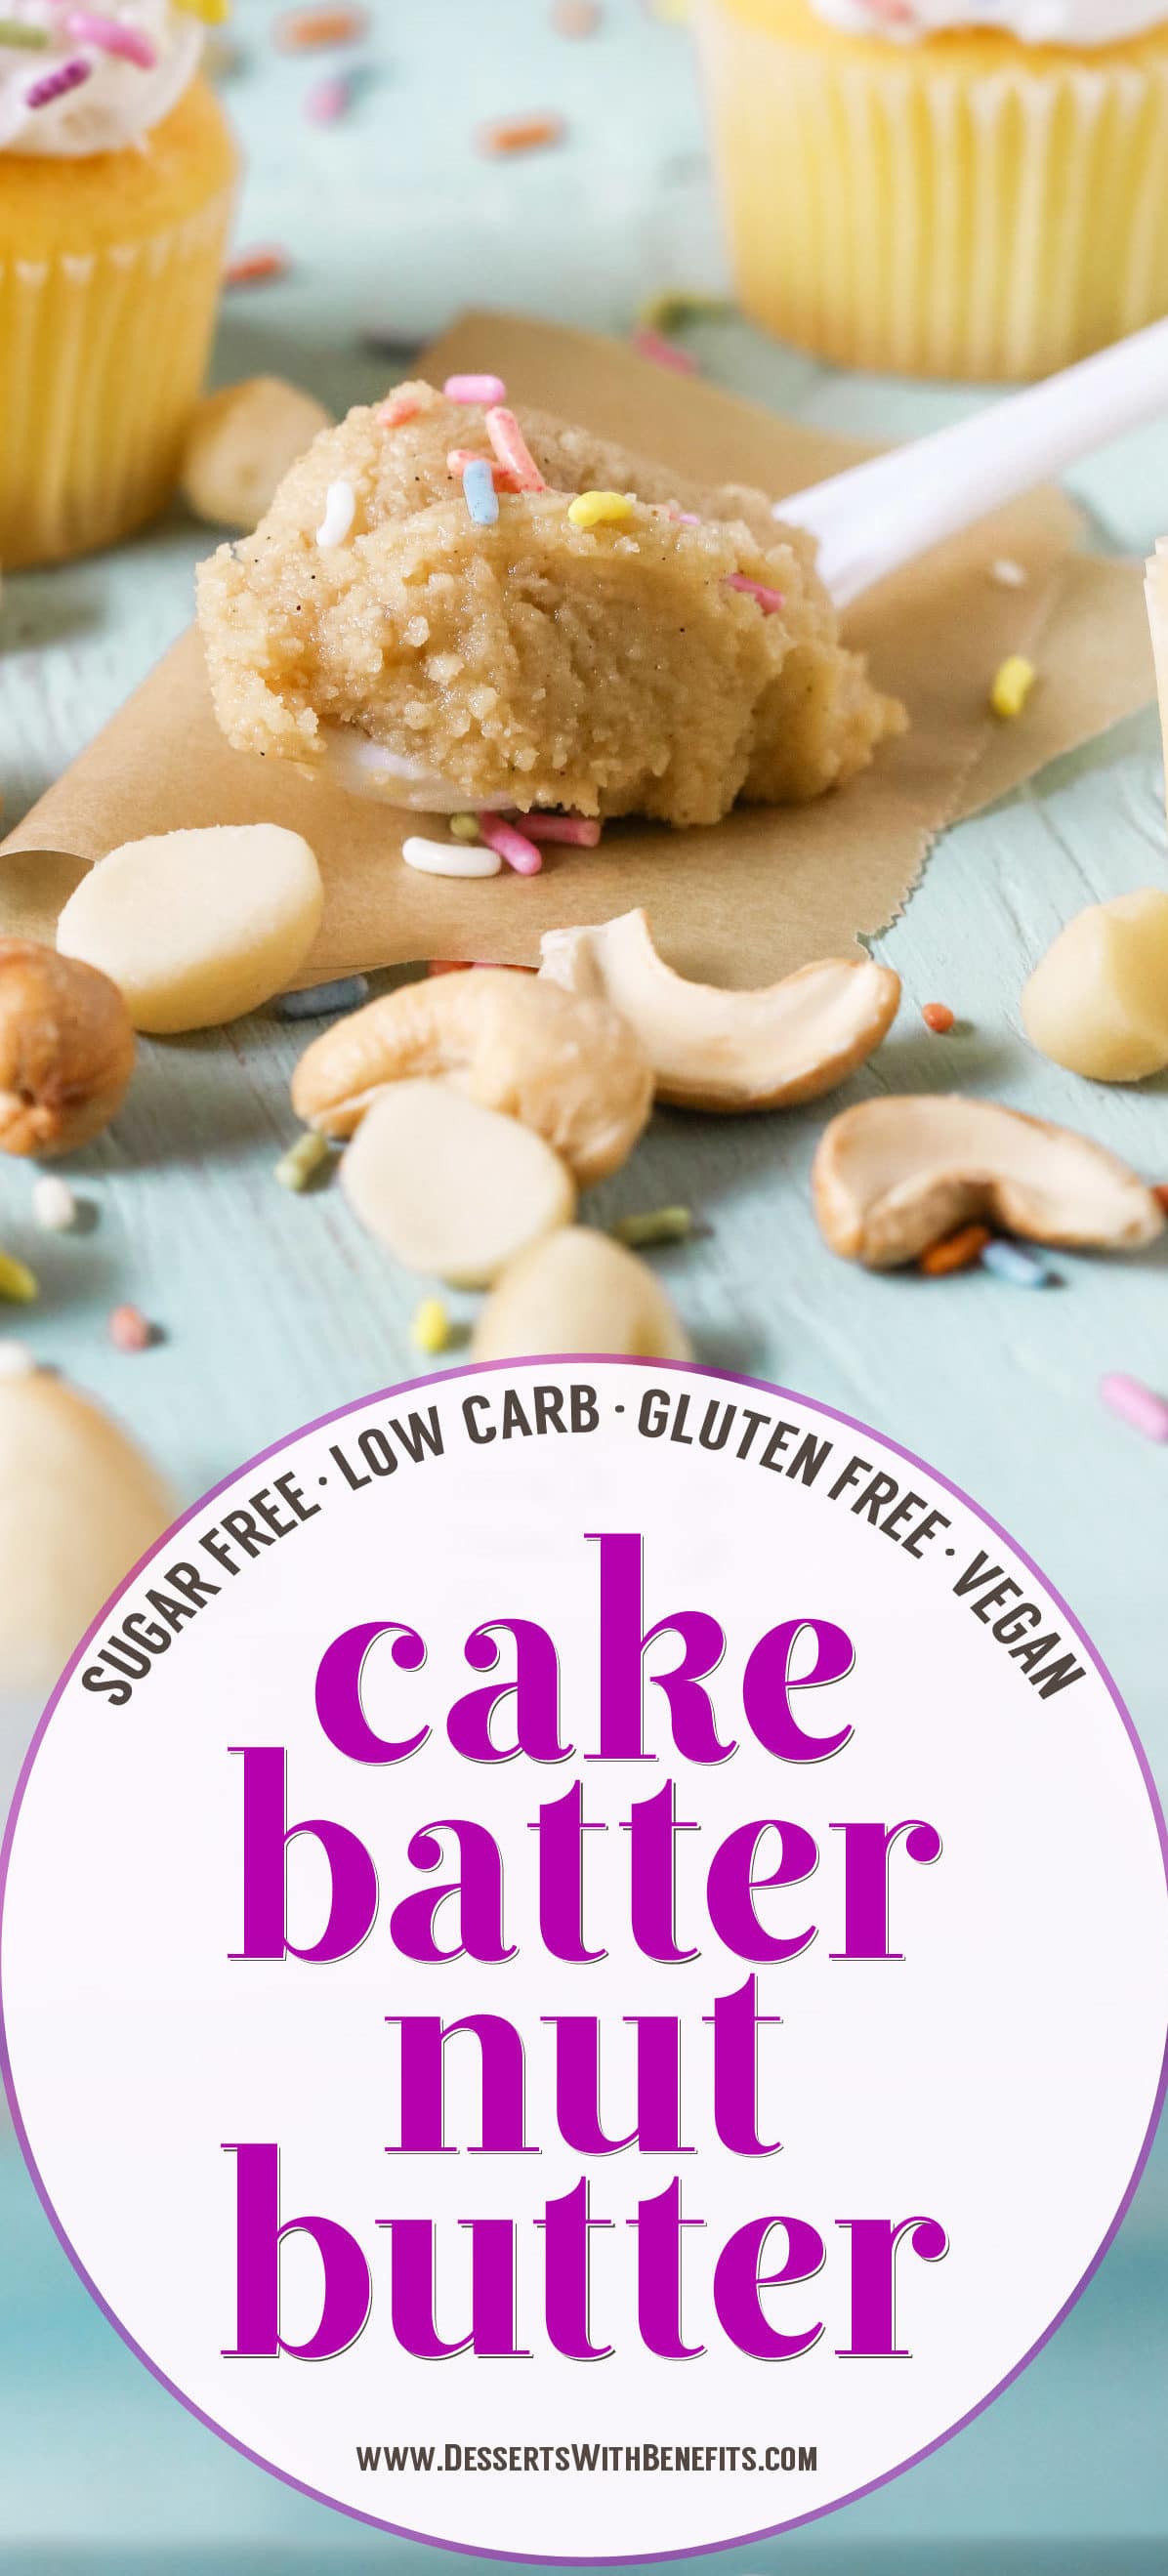 This Healthy Cake Batter Nut Butter is sweet, buttery, dense, thick, and spreadable. This easy 5-ingredient recipe is sugar free, low carb, gluten free, dairy free, and vegan!